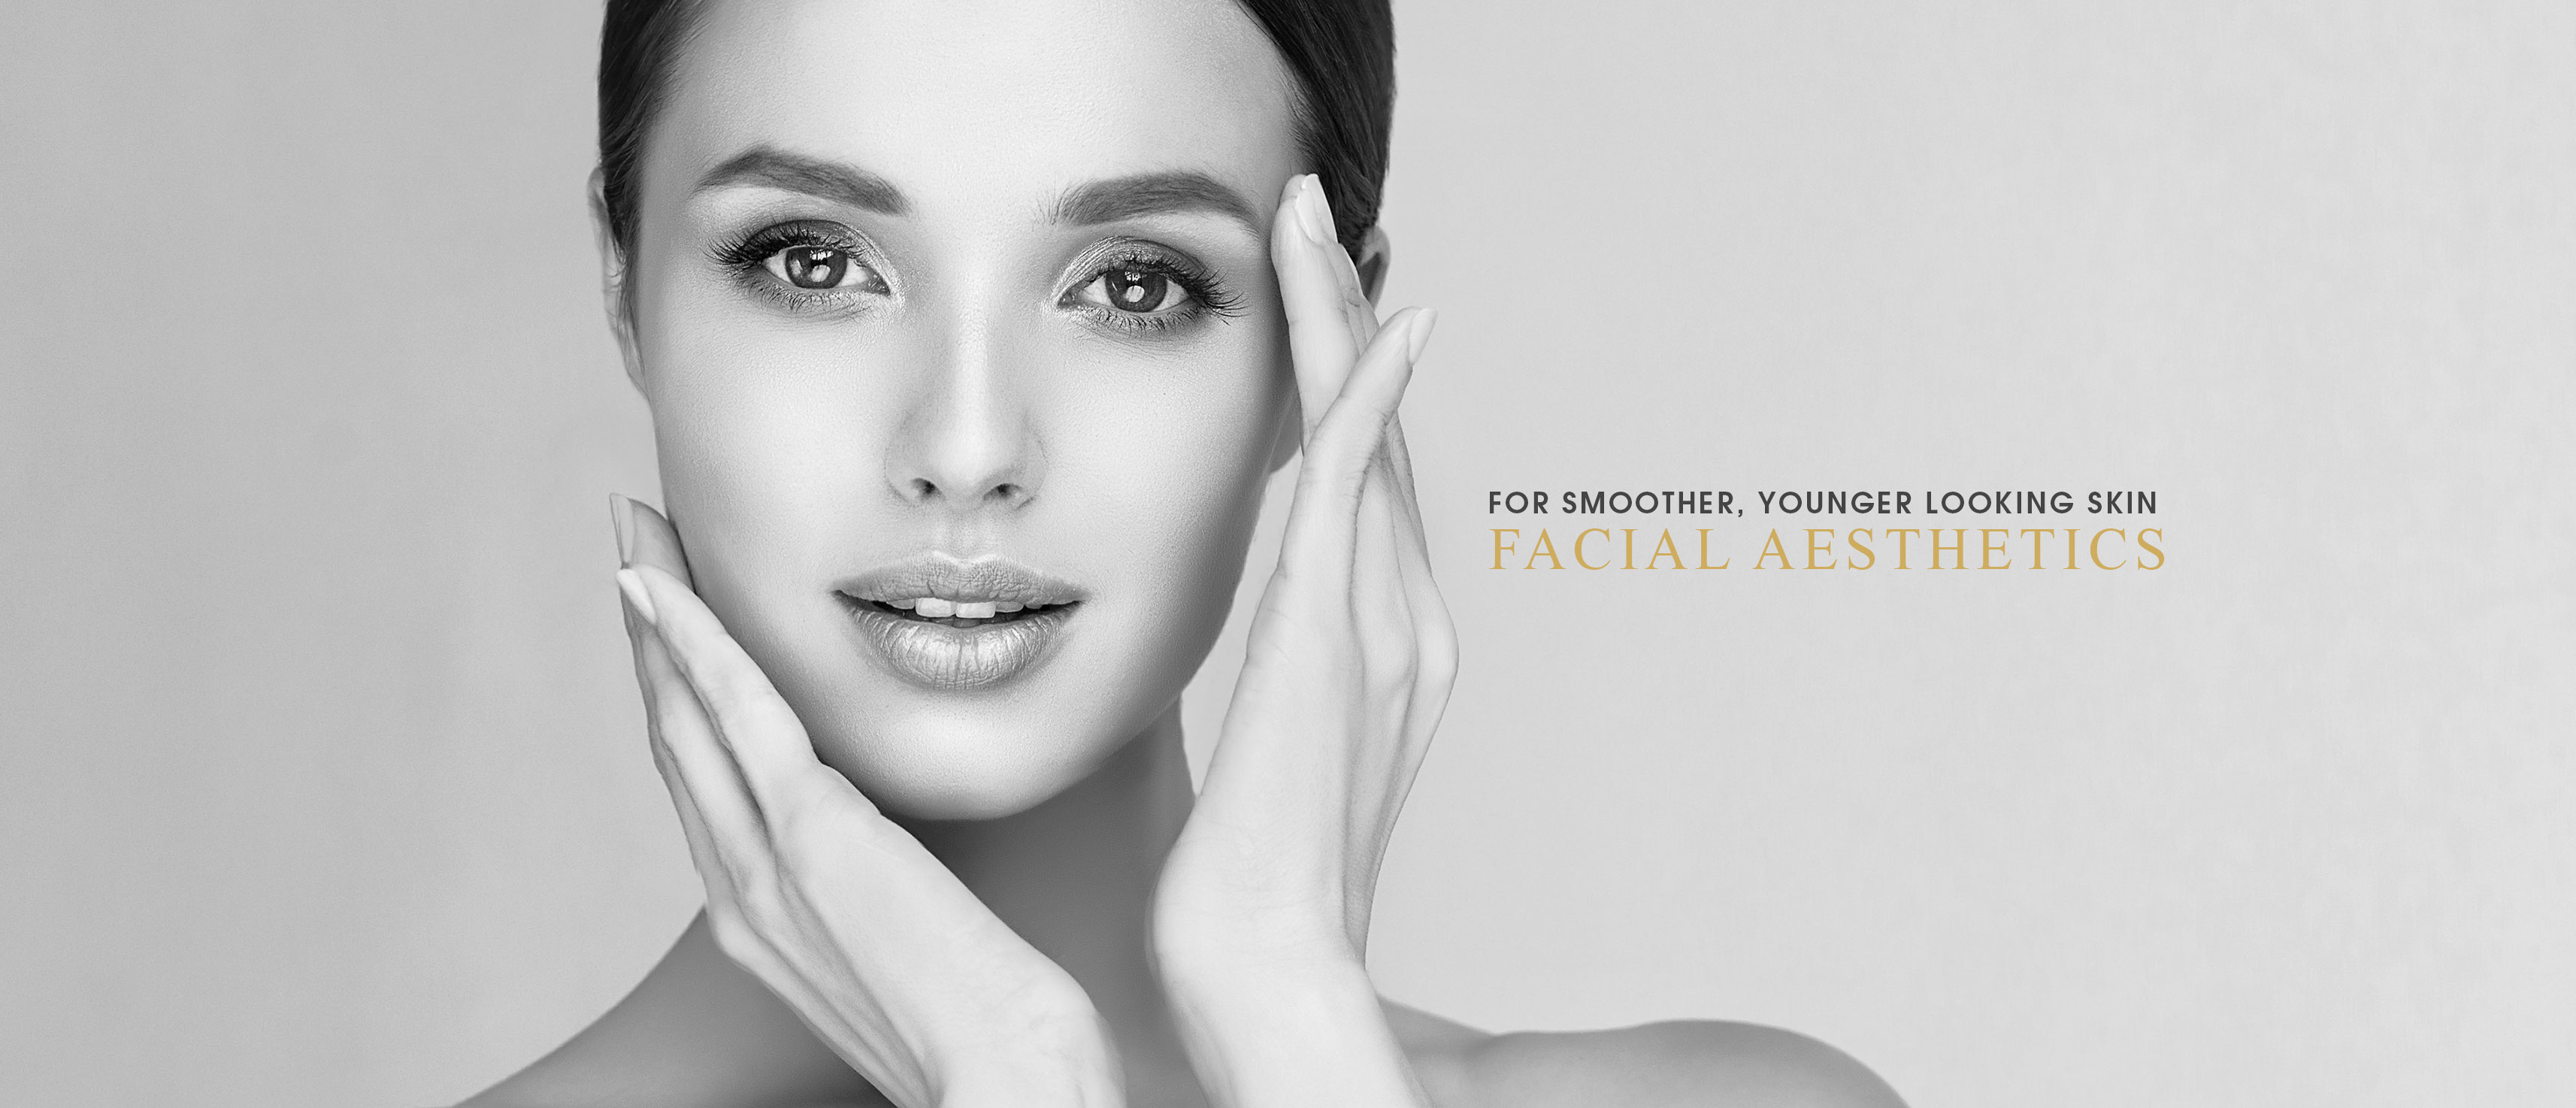 For smoother, younger looking skin. Facial Aesthetics